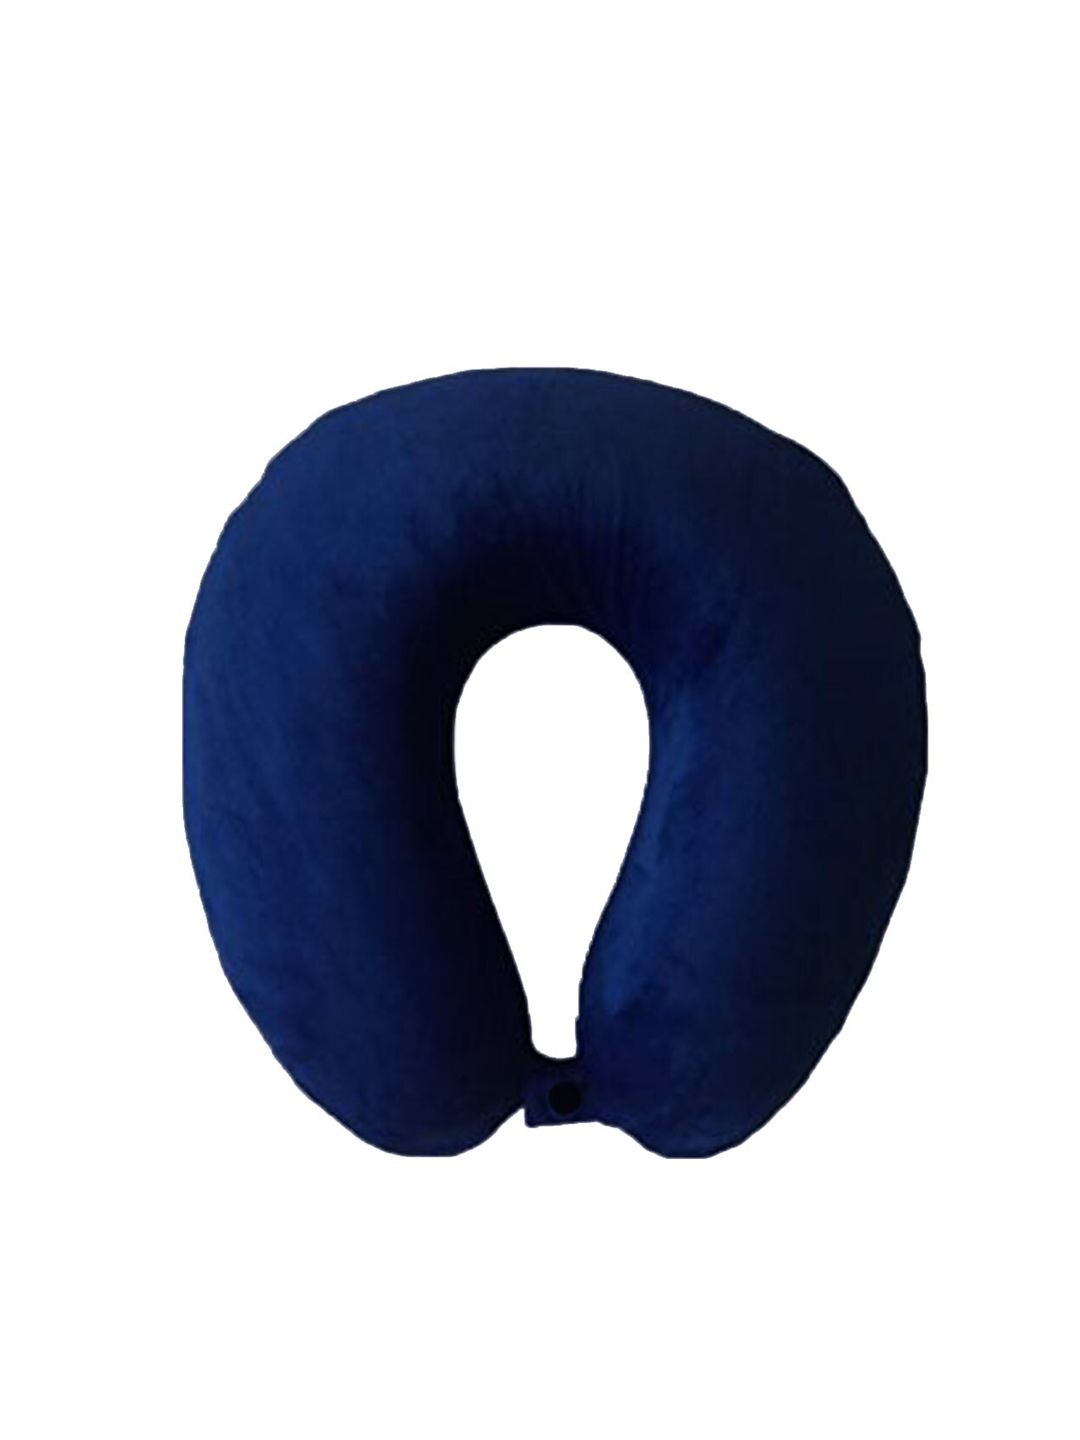 Lushomes Navy Blue Travel Neck Pillow for Neck Support Price in India